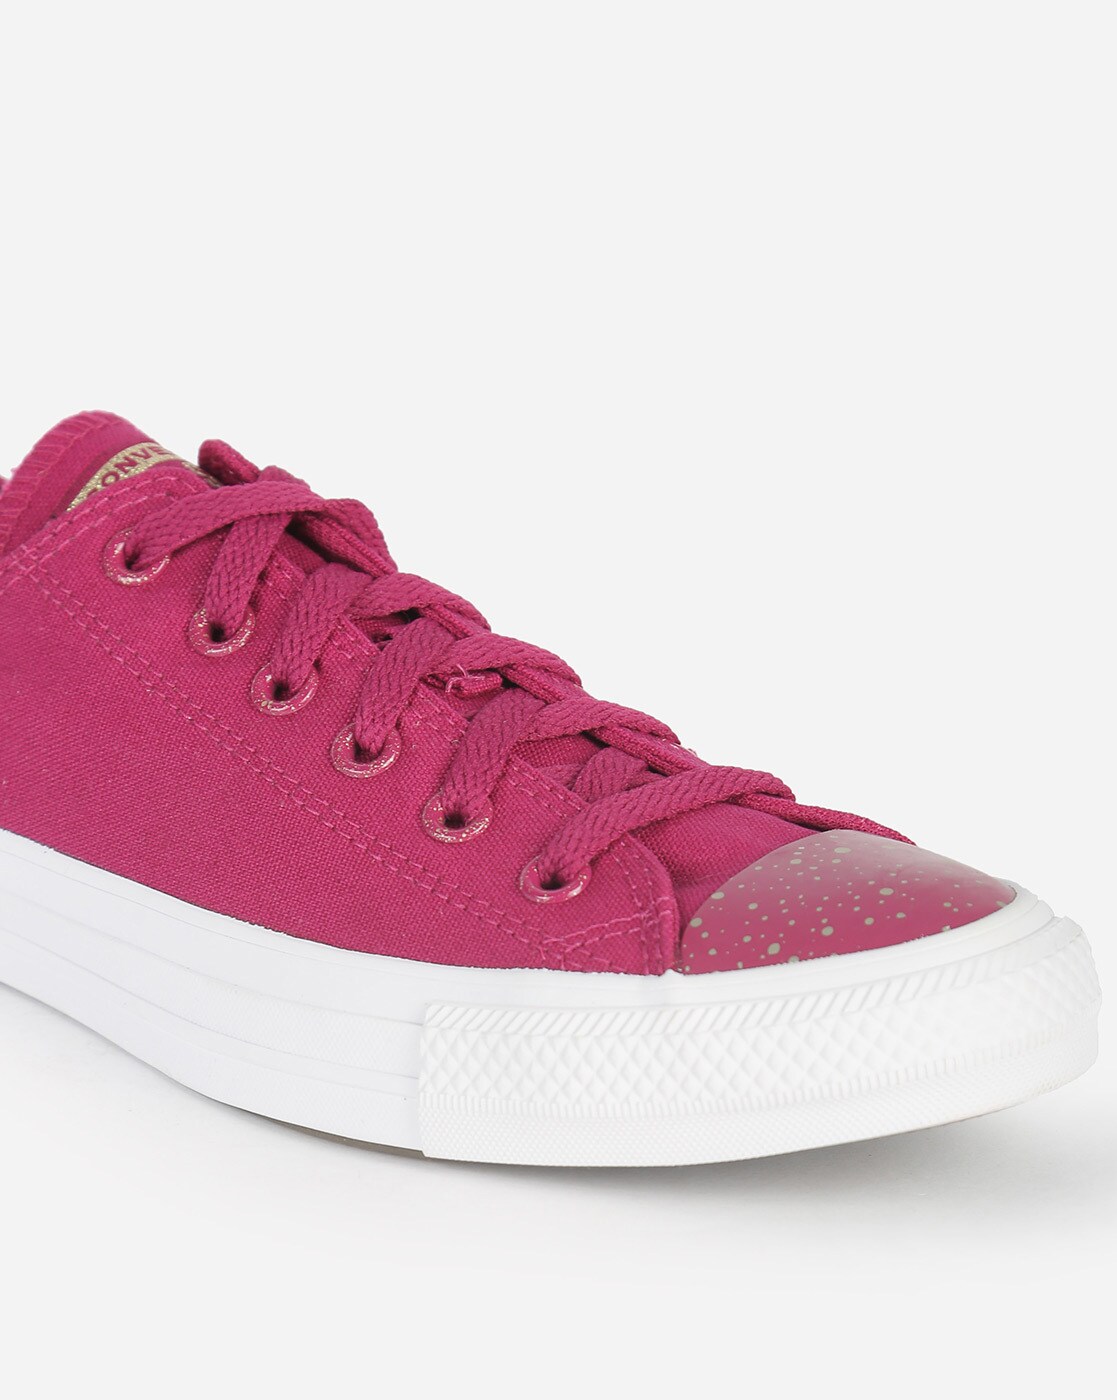 Converse All Star Pink Wholesale Shop, Save 59% 